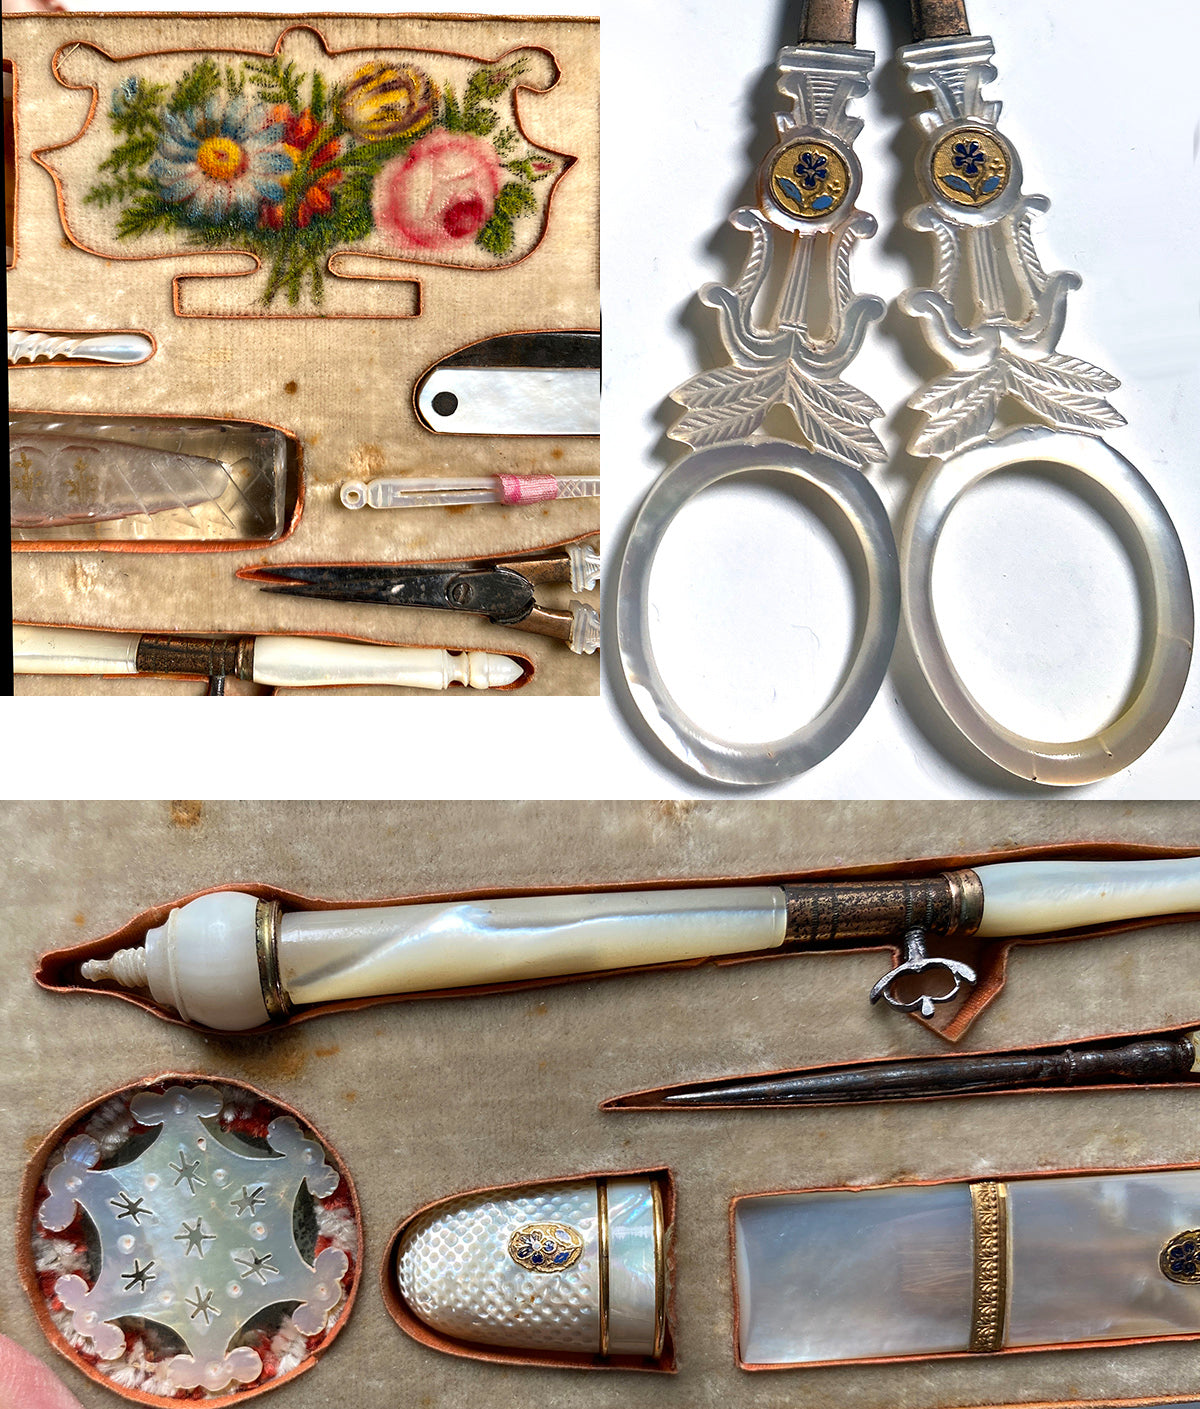 Superb Antique C.1810 French Palais Royal 8.6" Sewing Box, Mother of Pearl Tools, 18k Gold 6 Medallions, Crochet Tambour